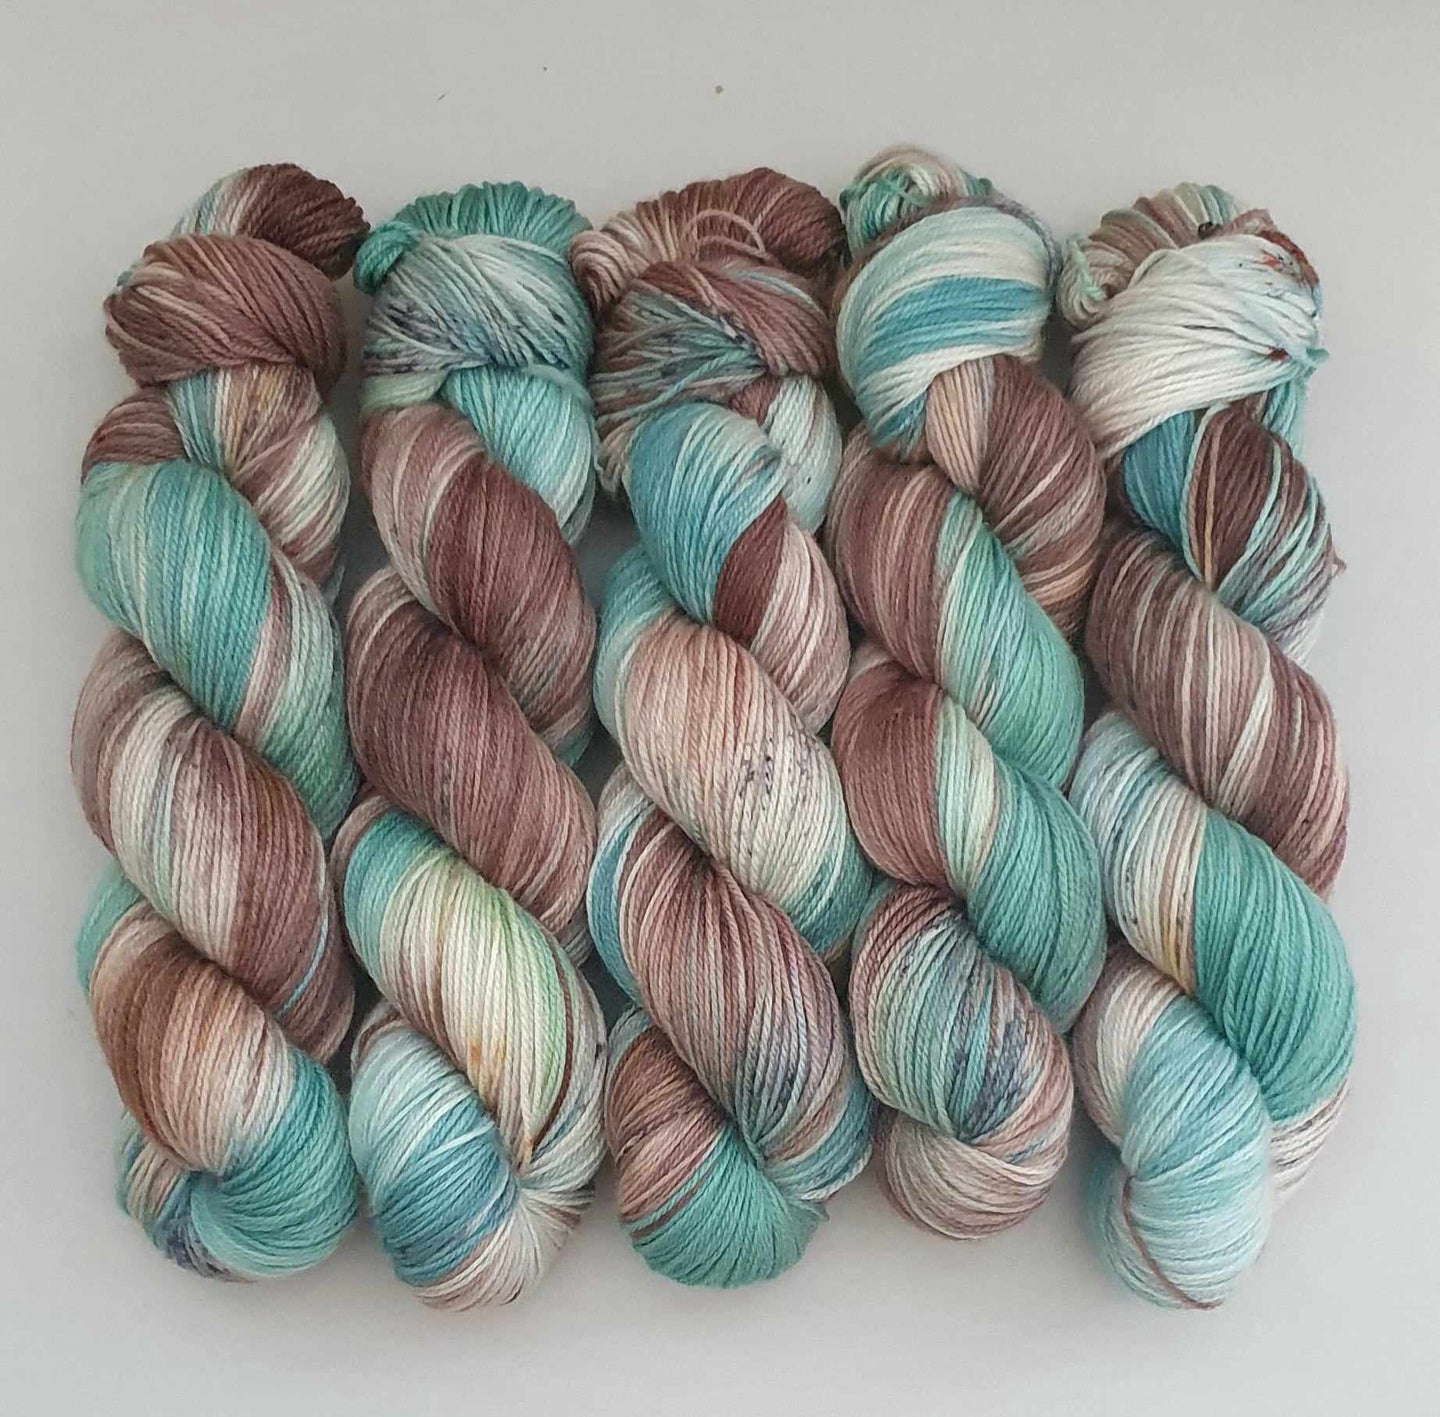 Tumbled Turquoise (Fledgling 4ply Sock)